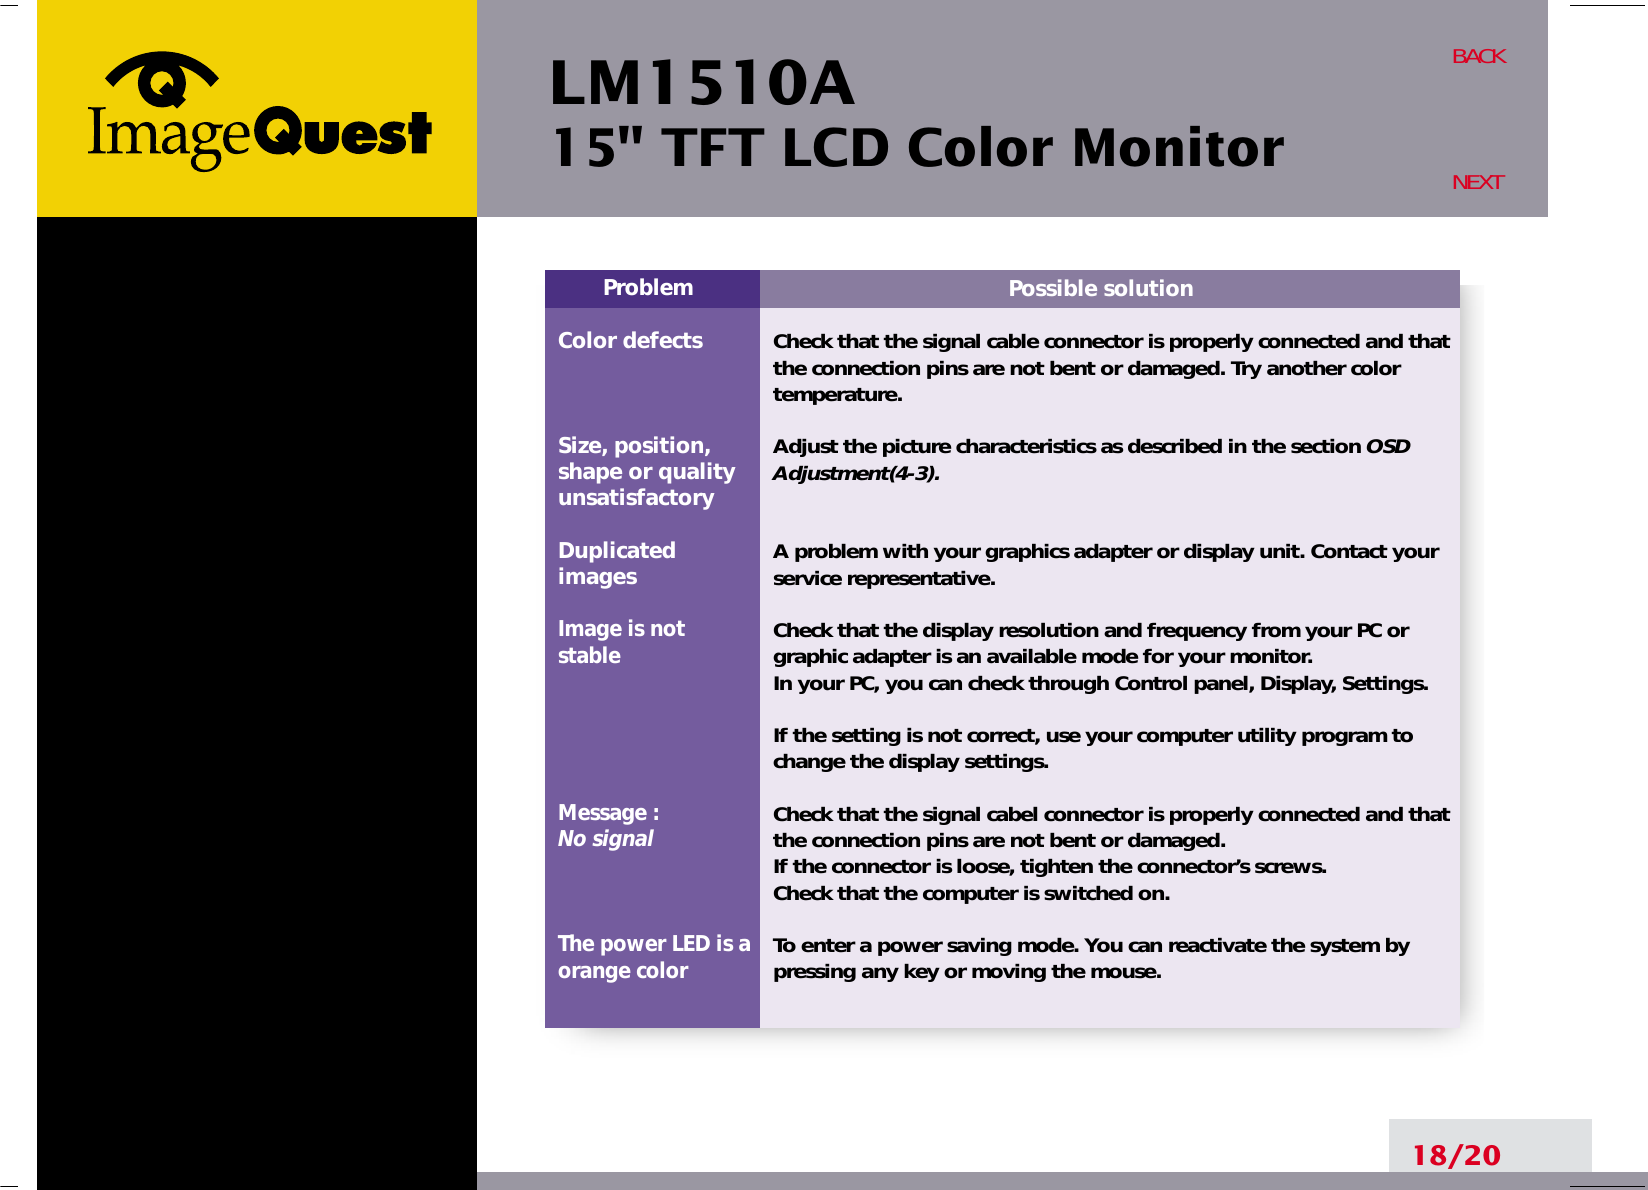 LM1510A15&quot; TFT LCD Color Monitor18/20BACKNEXTPossible solutionCheck that the signal cable connector is properly connected and thatthe connection pins are not bent or damaged. Try another colortemperature. Adjust the picture characteristics as described in the section OSDAdjustment(4-3).A problem with your graphics adapter or display unit. Contact yourservice representative.Check that the display resolution and frequency from your PC orgraphic adapter is an available mode for your monitor.In your PC, you can check through Control panel, Display, Settings.If the setting is not correct, use your computer utility program tochange the display settings.Check that the signal cabel connector is properly connected and thatthe connection pins are not bent or damaged.If the connector is loose, tighten the connector’s screws.Check that the computer is switched on.To enter a power saving mode. You can reactivate the system bypressing any key or moving the mouse.ProblemColor defectsSize, position,shape or qualityunsatisfactoryDuplicatedimagesImage is notstableMessage : No signalThe power LED is aorange color